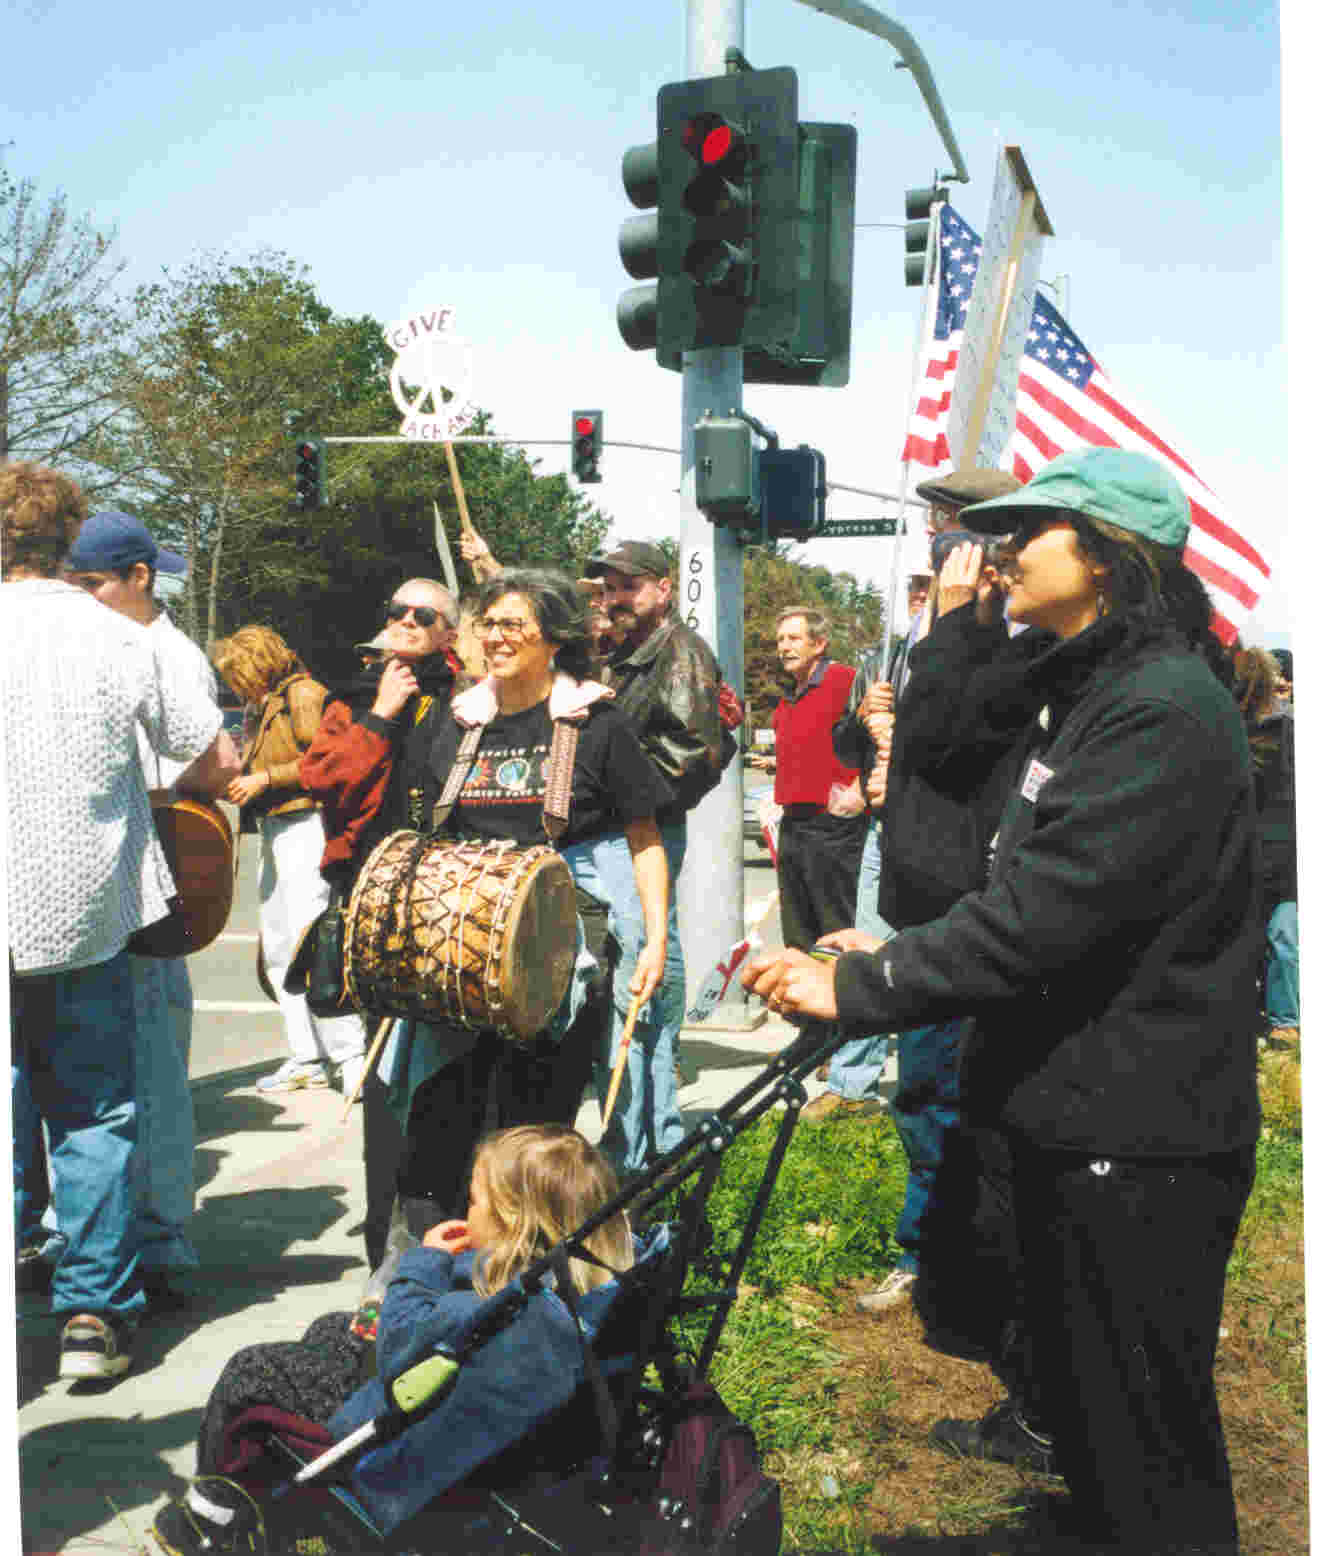 4-5-03_mothers___children_for_peace_fb_march_to_town_hall.jpg 